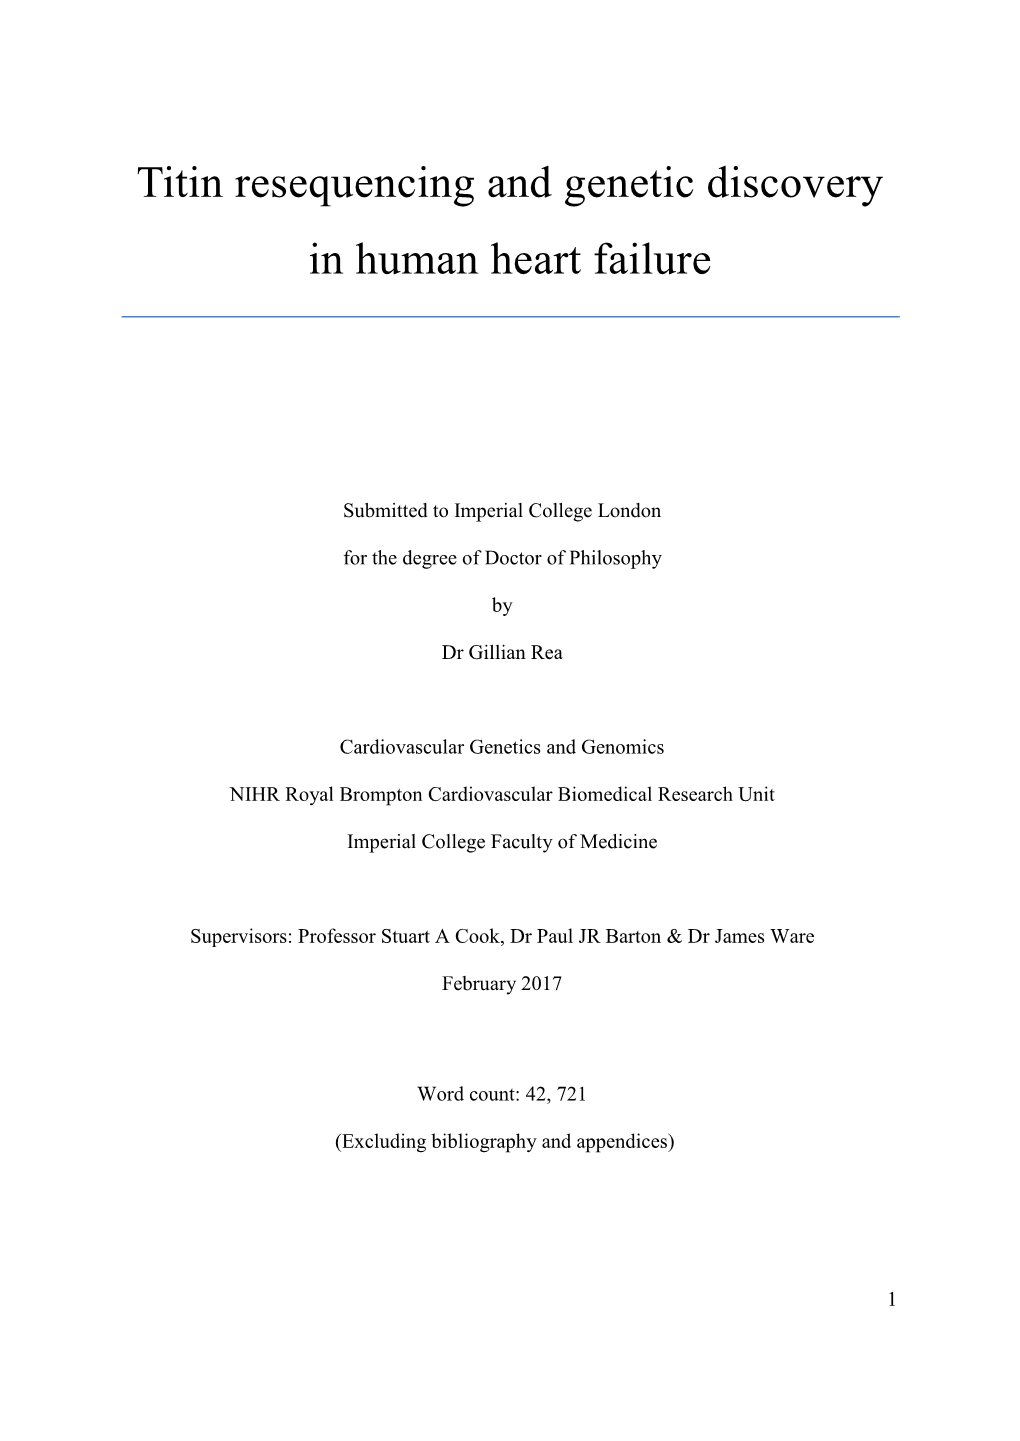 Titin Resequencing and Genetic Discovery in Human Heart Failure